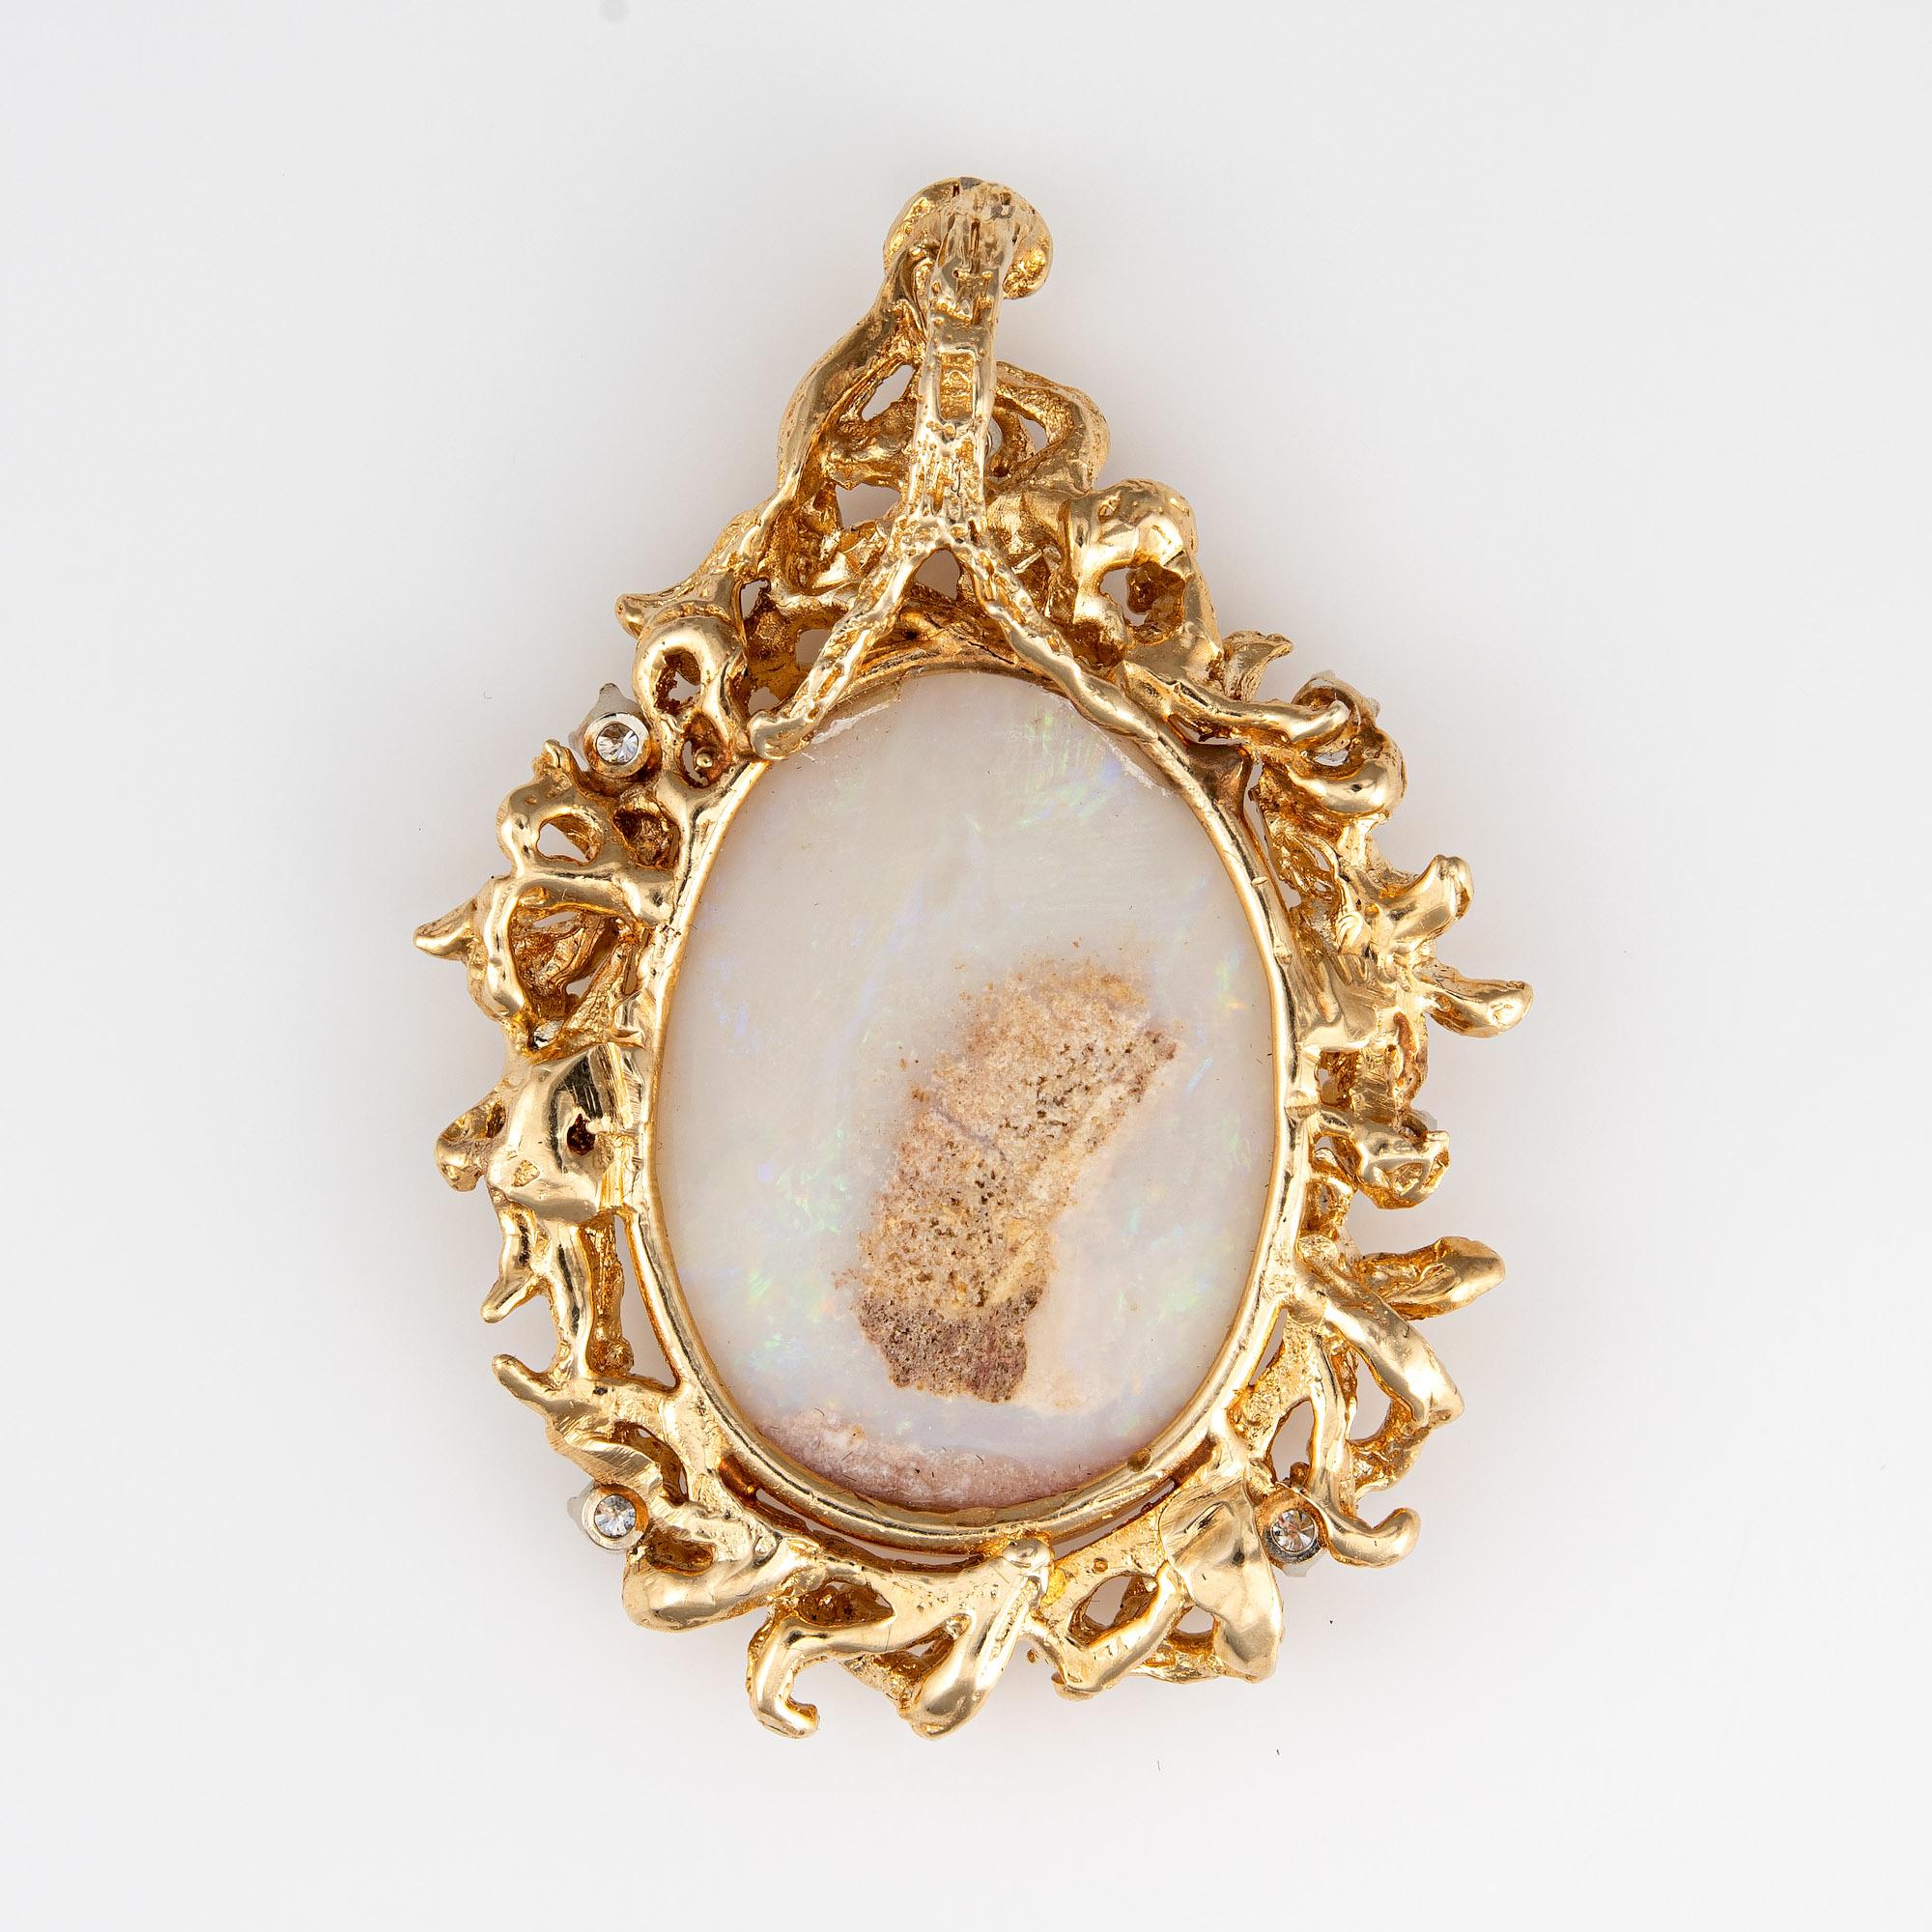 Finely detailed vintage opal & diamond pendant crafted in 14 karat yellow gold (circa 1970s). 

Cabochon cut opal measures 29mm x 21mm (estimated at 19 carats), accented with an estimated 0.75 carats of diamonds (estimated at G-H color and VS2-SI1